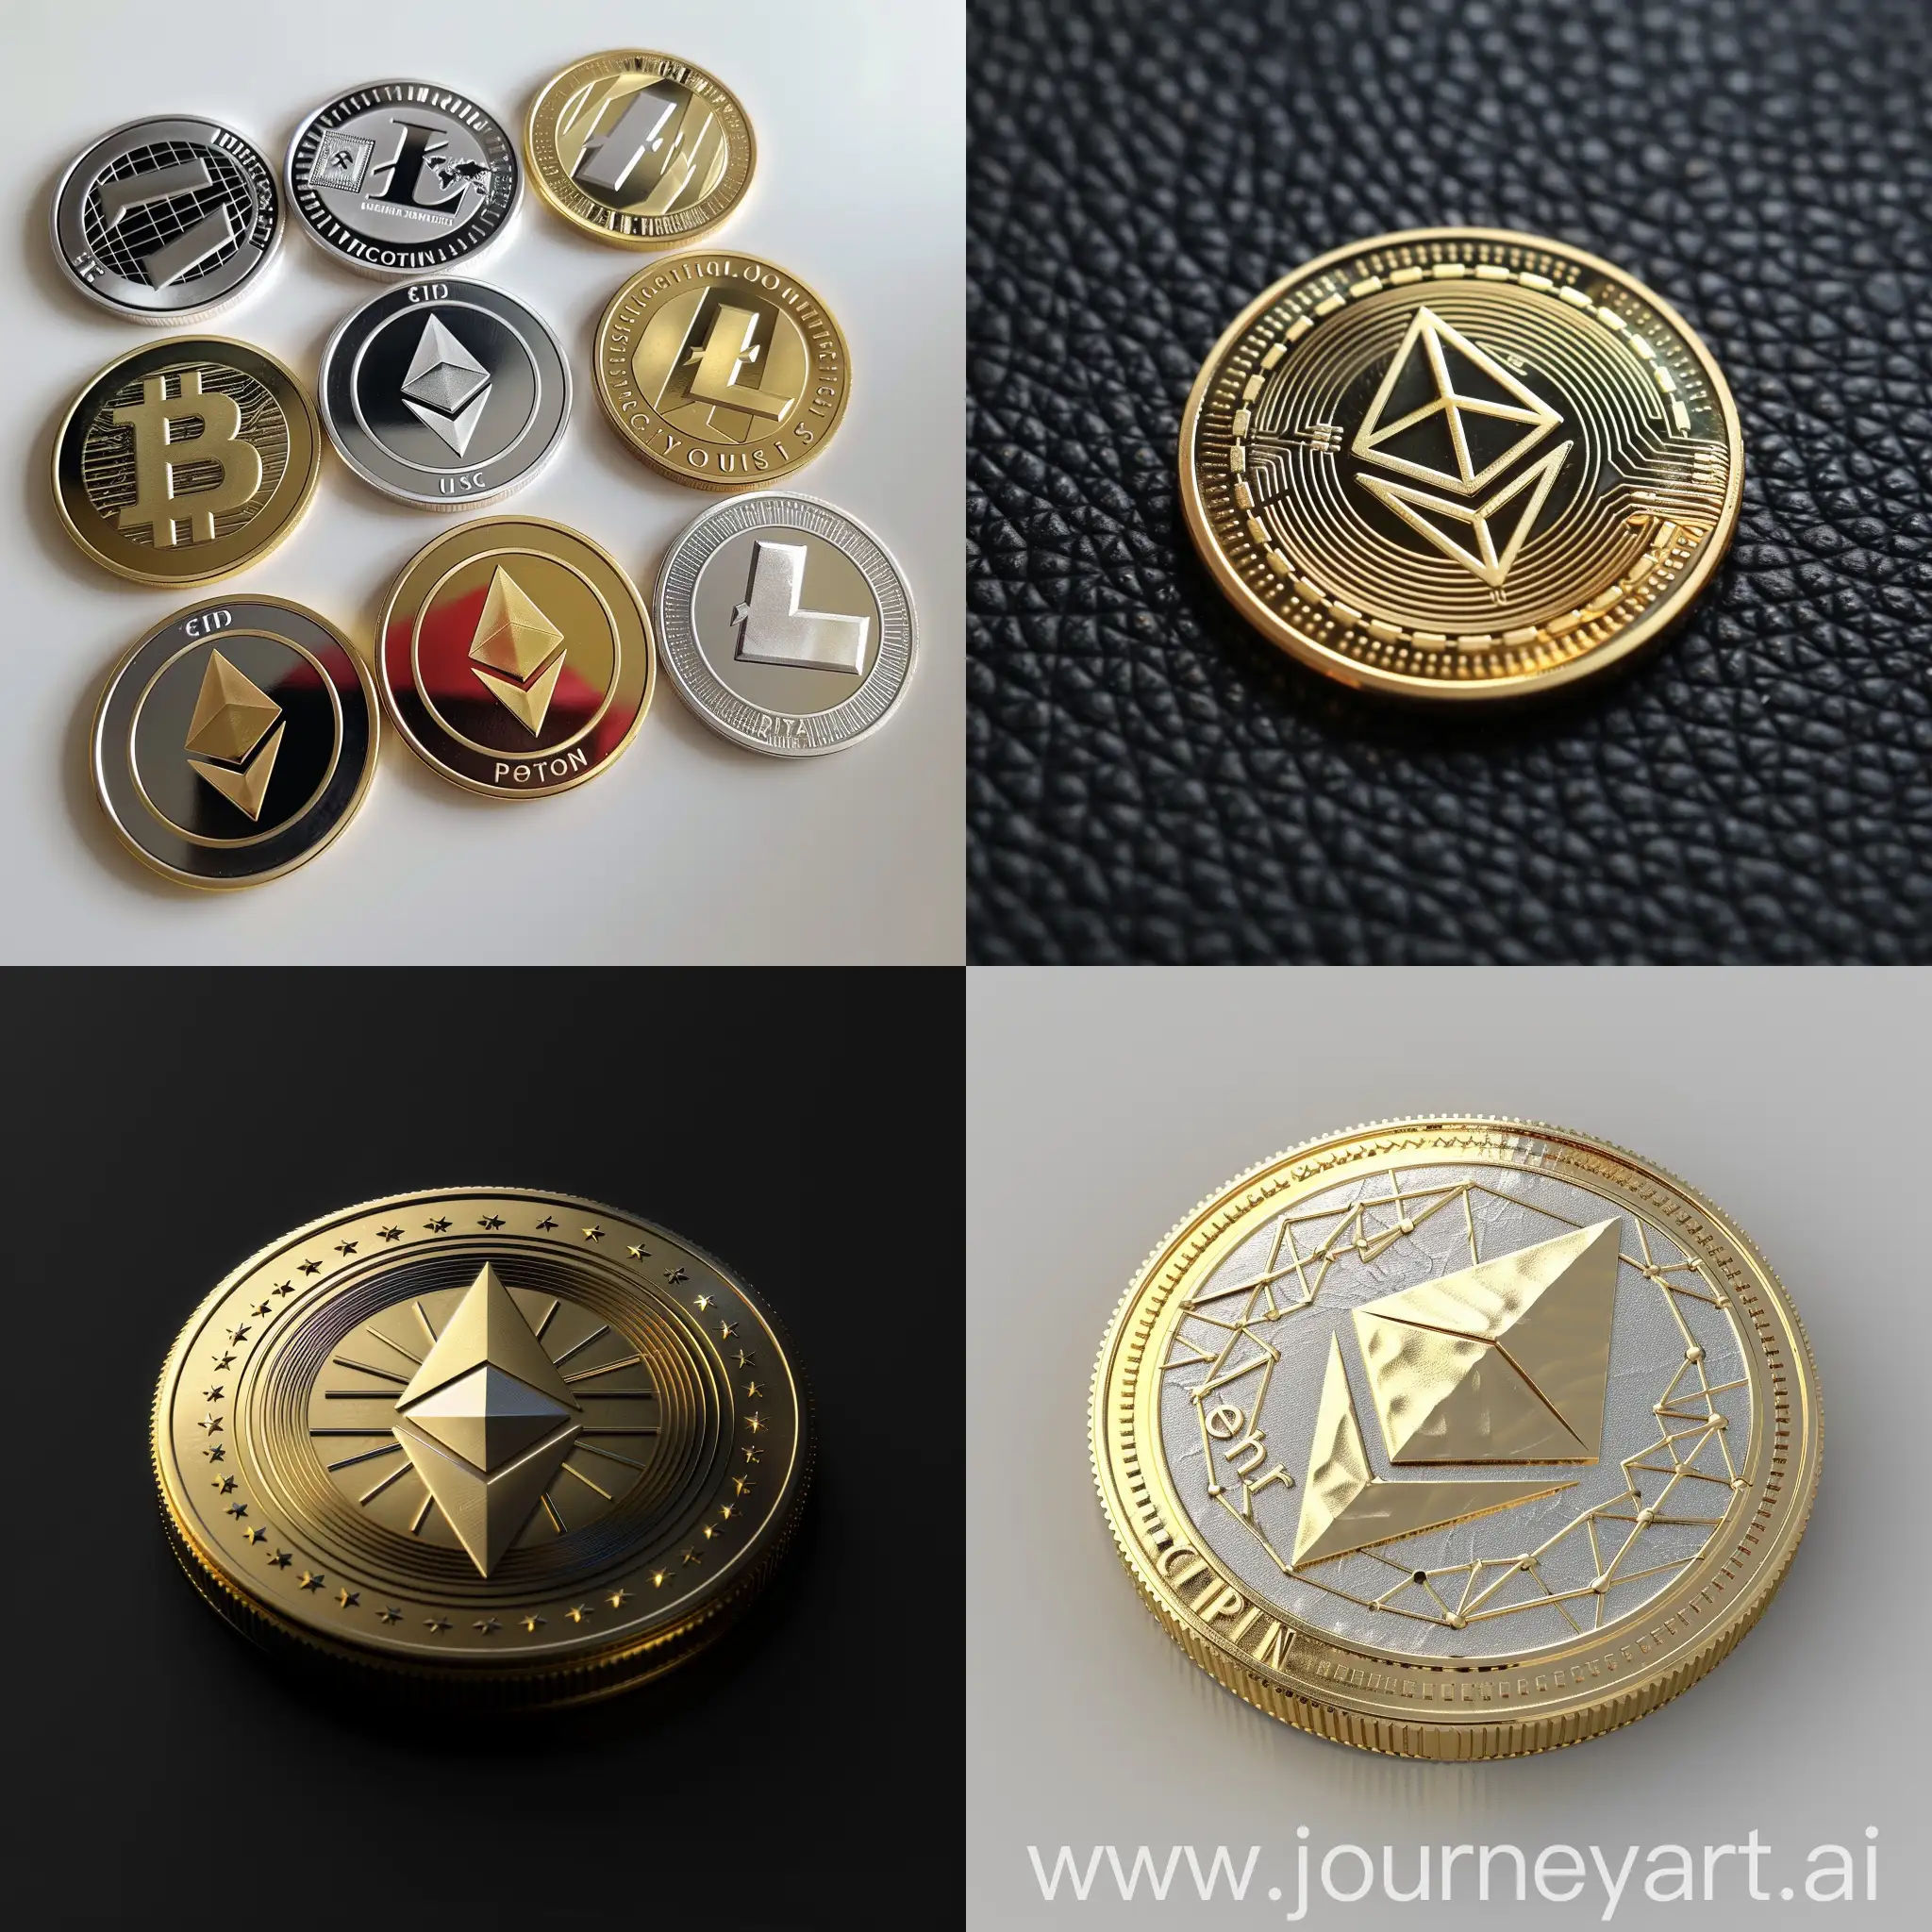 Futuristic-Crypto-Coin-Digital-Currency-Concept-Art